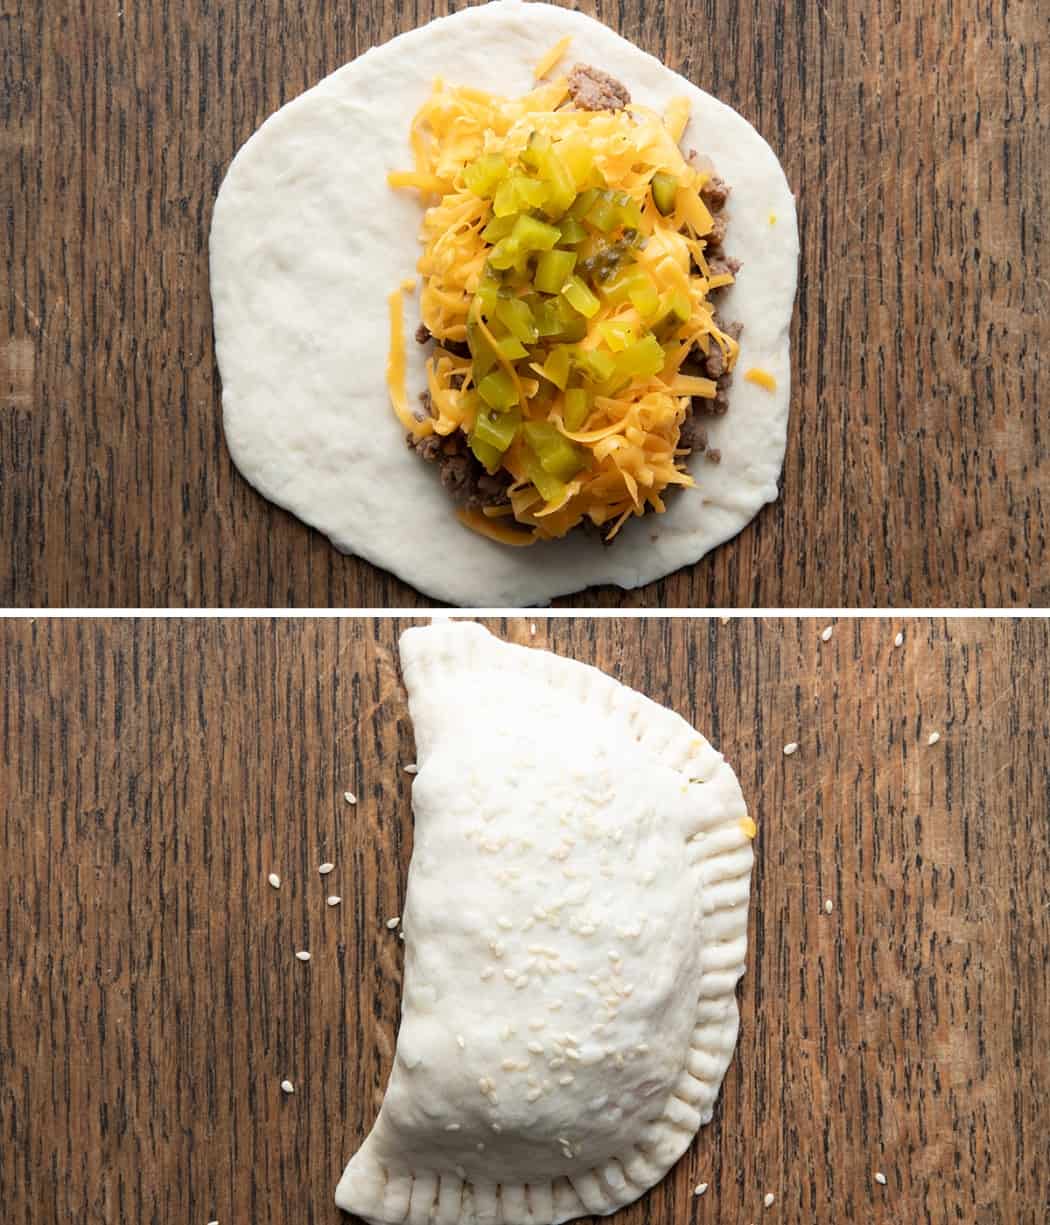 Steps for filling and folding Cheeseburgers Hand Pies